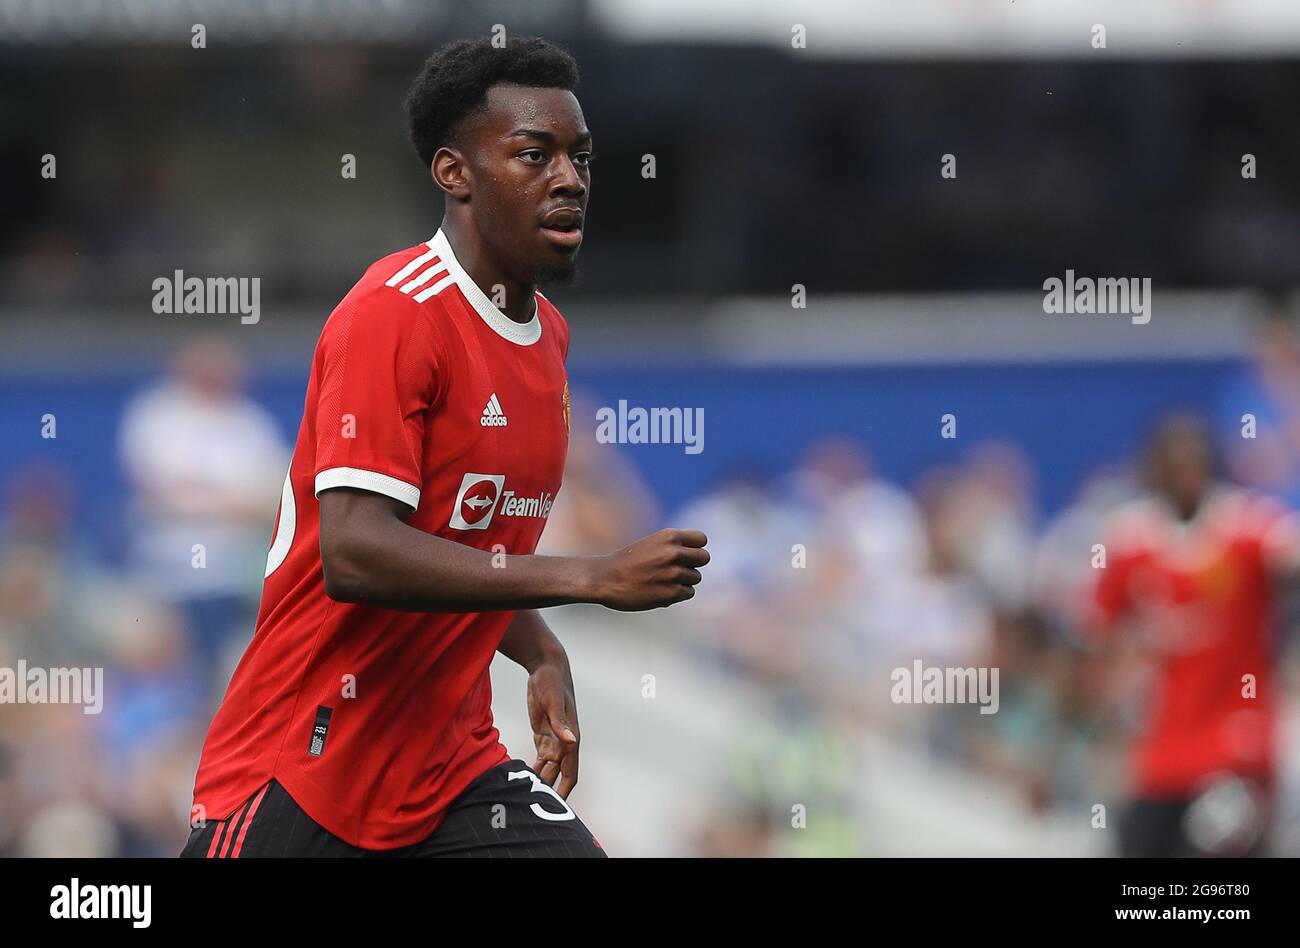 London, England, 24th July 2021. Manchester UnitedÕs Anthony Elanga during the Pre Season Friendly match at The Kiyan Prince Foundation Stadium, London. Picture credit should read: Paul Terry / Sportimage Stock Photo